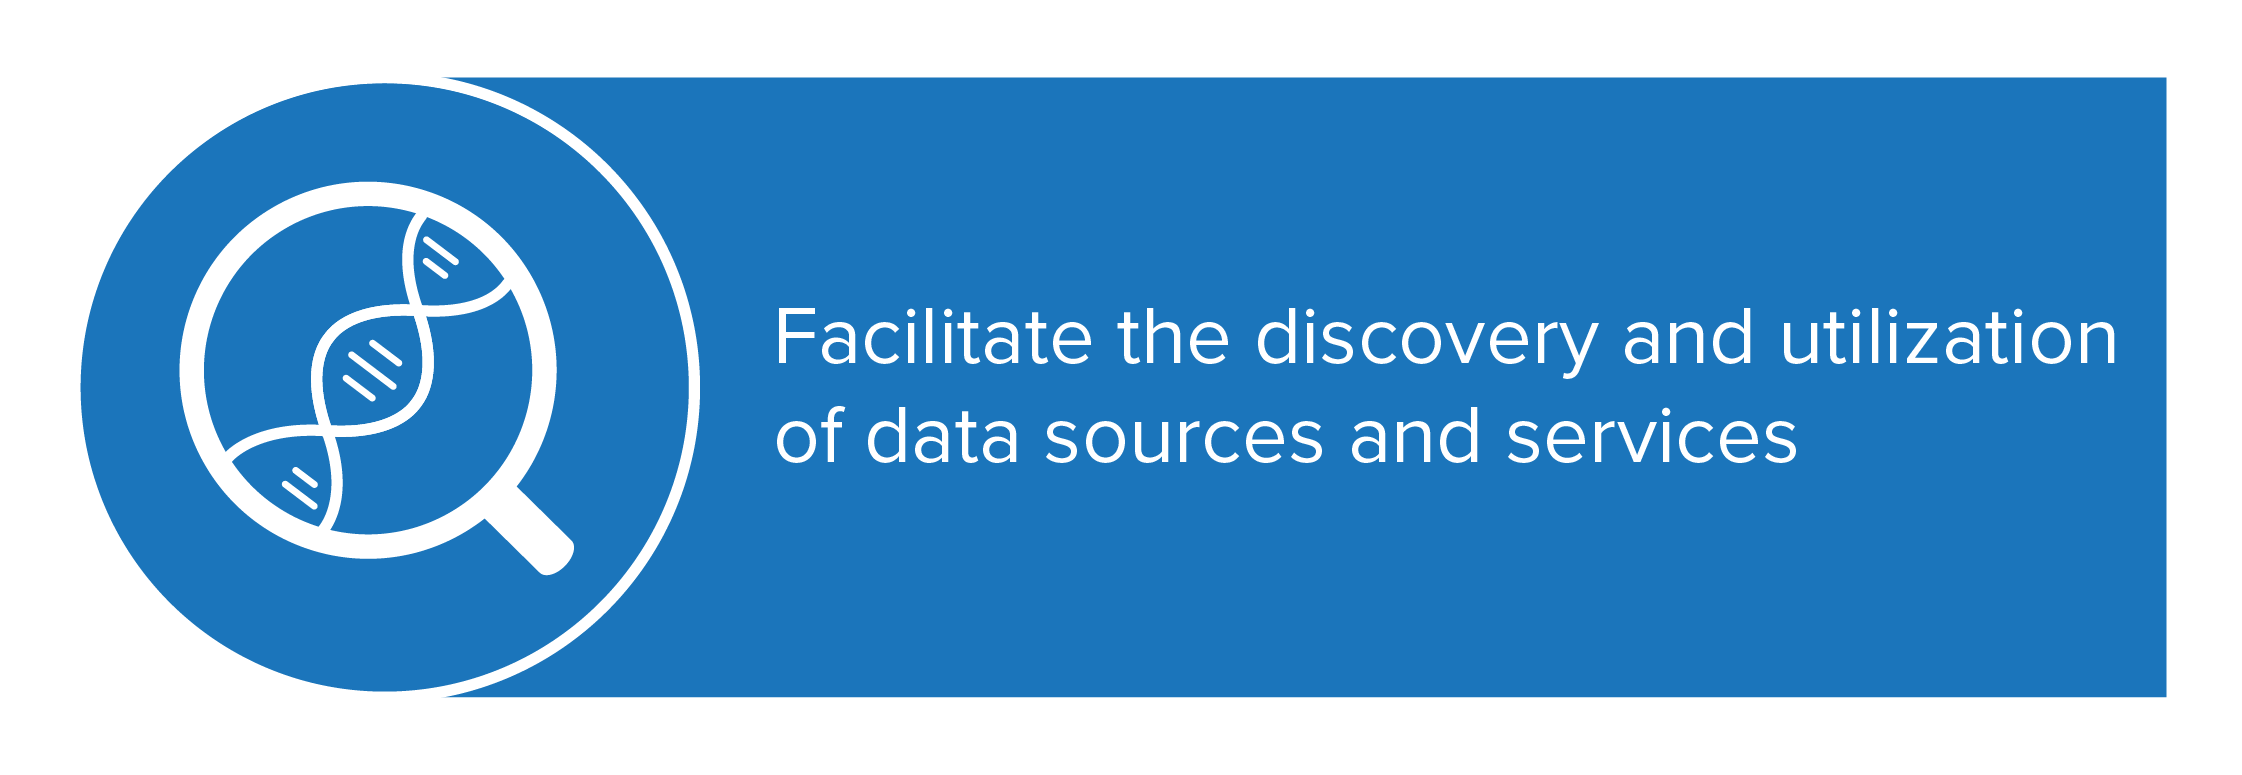 The Discovery Work Stream facilitates the discovery and utilisation of data sources and services.